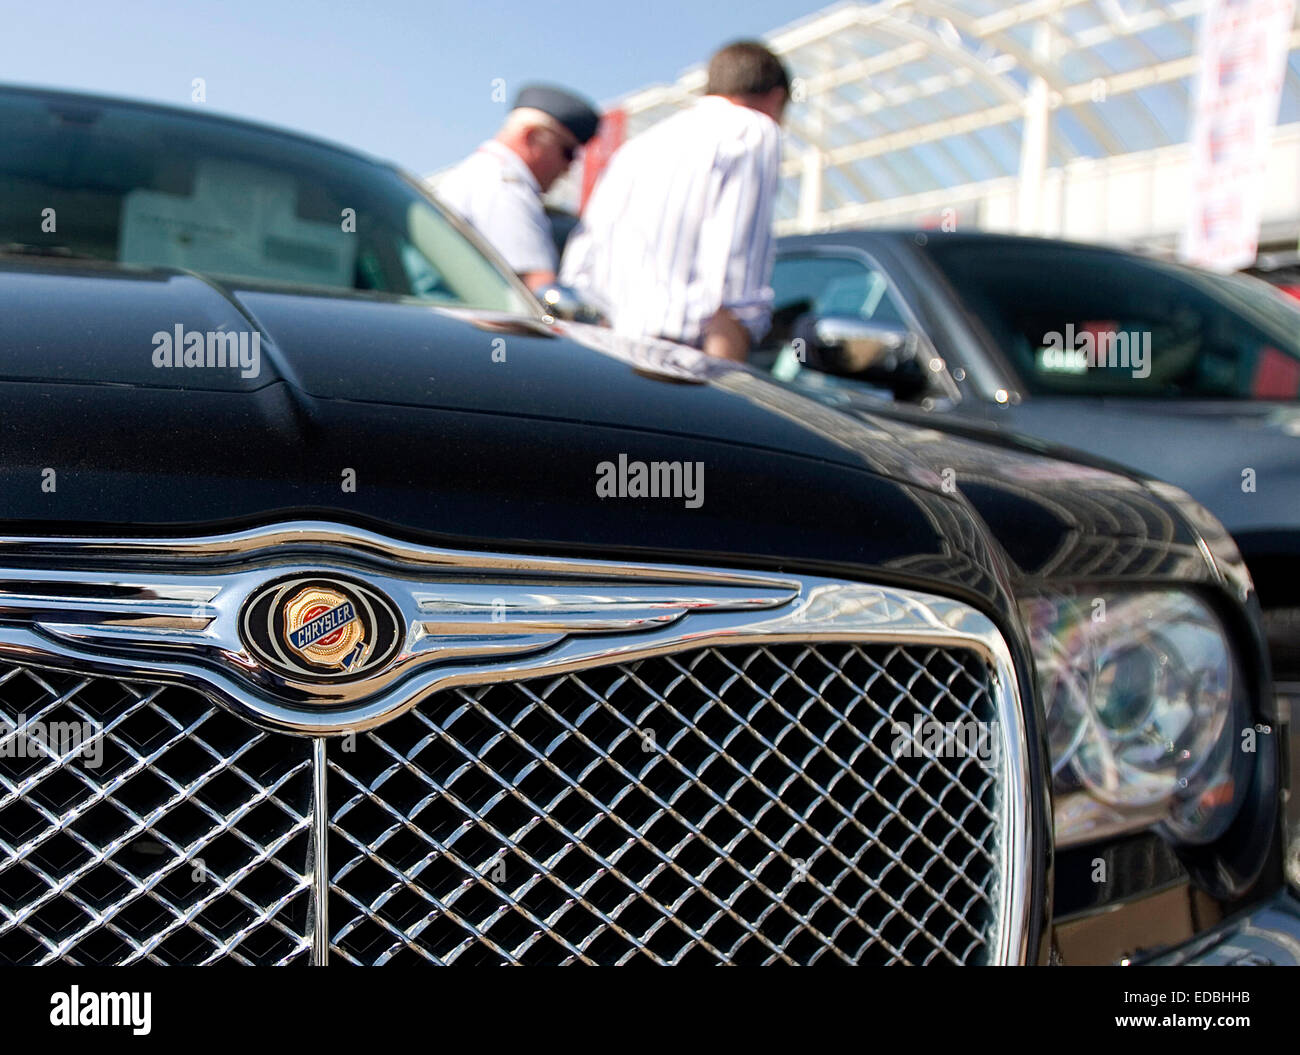 Illustrative image of Chrysler cars for sale at a Cambridge dealership. Stock Photo